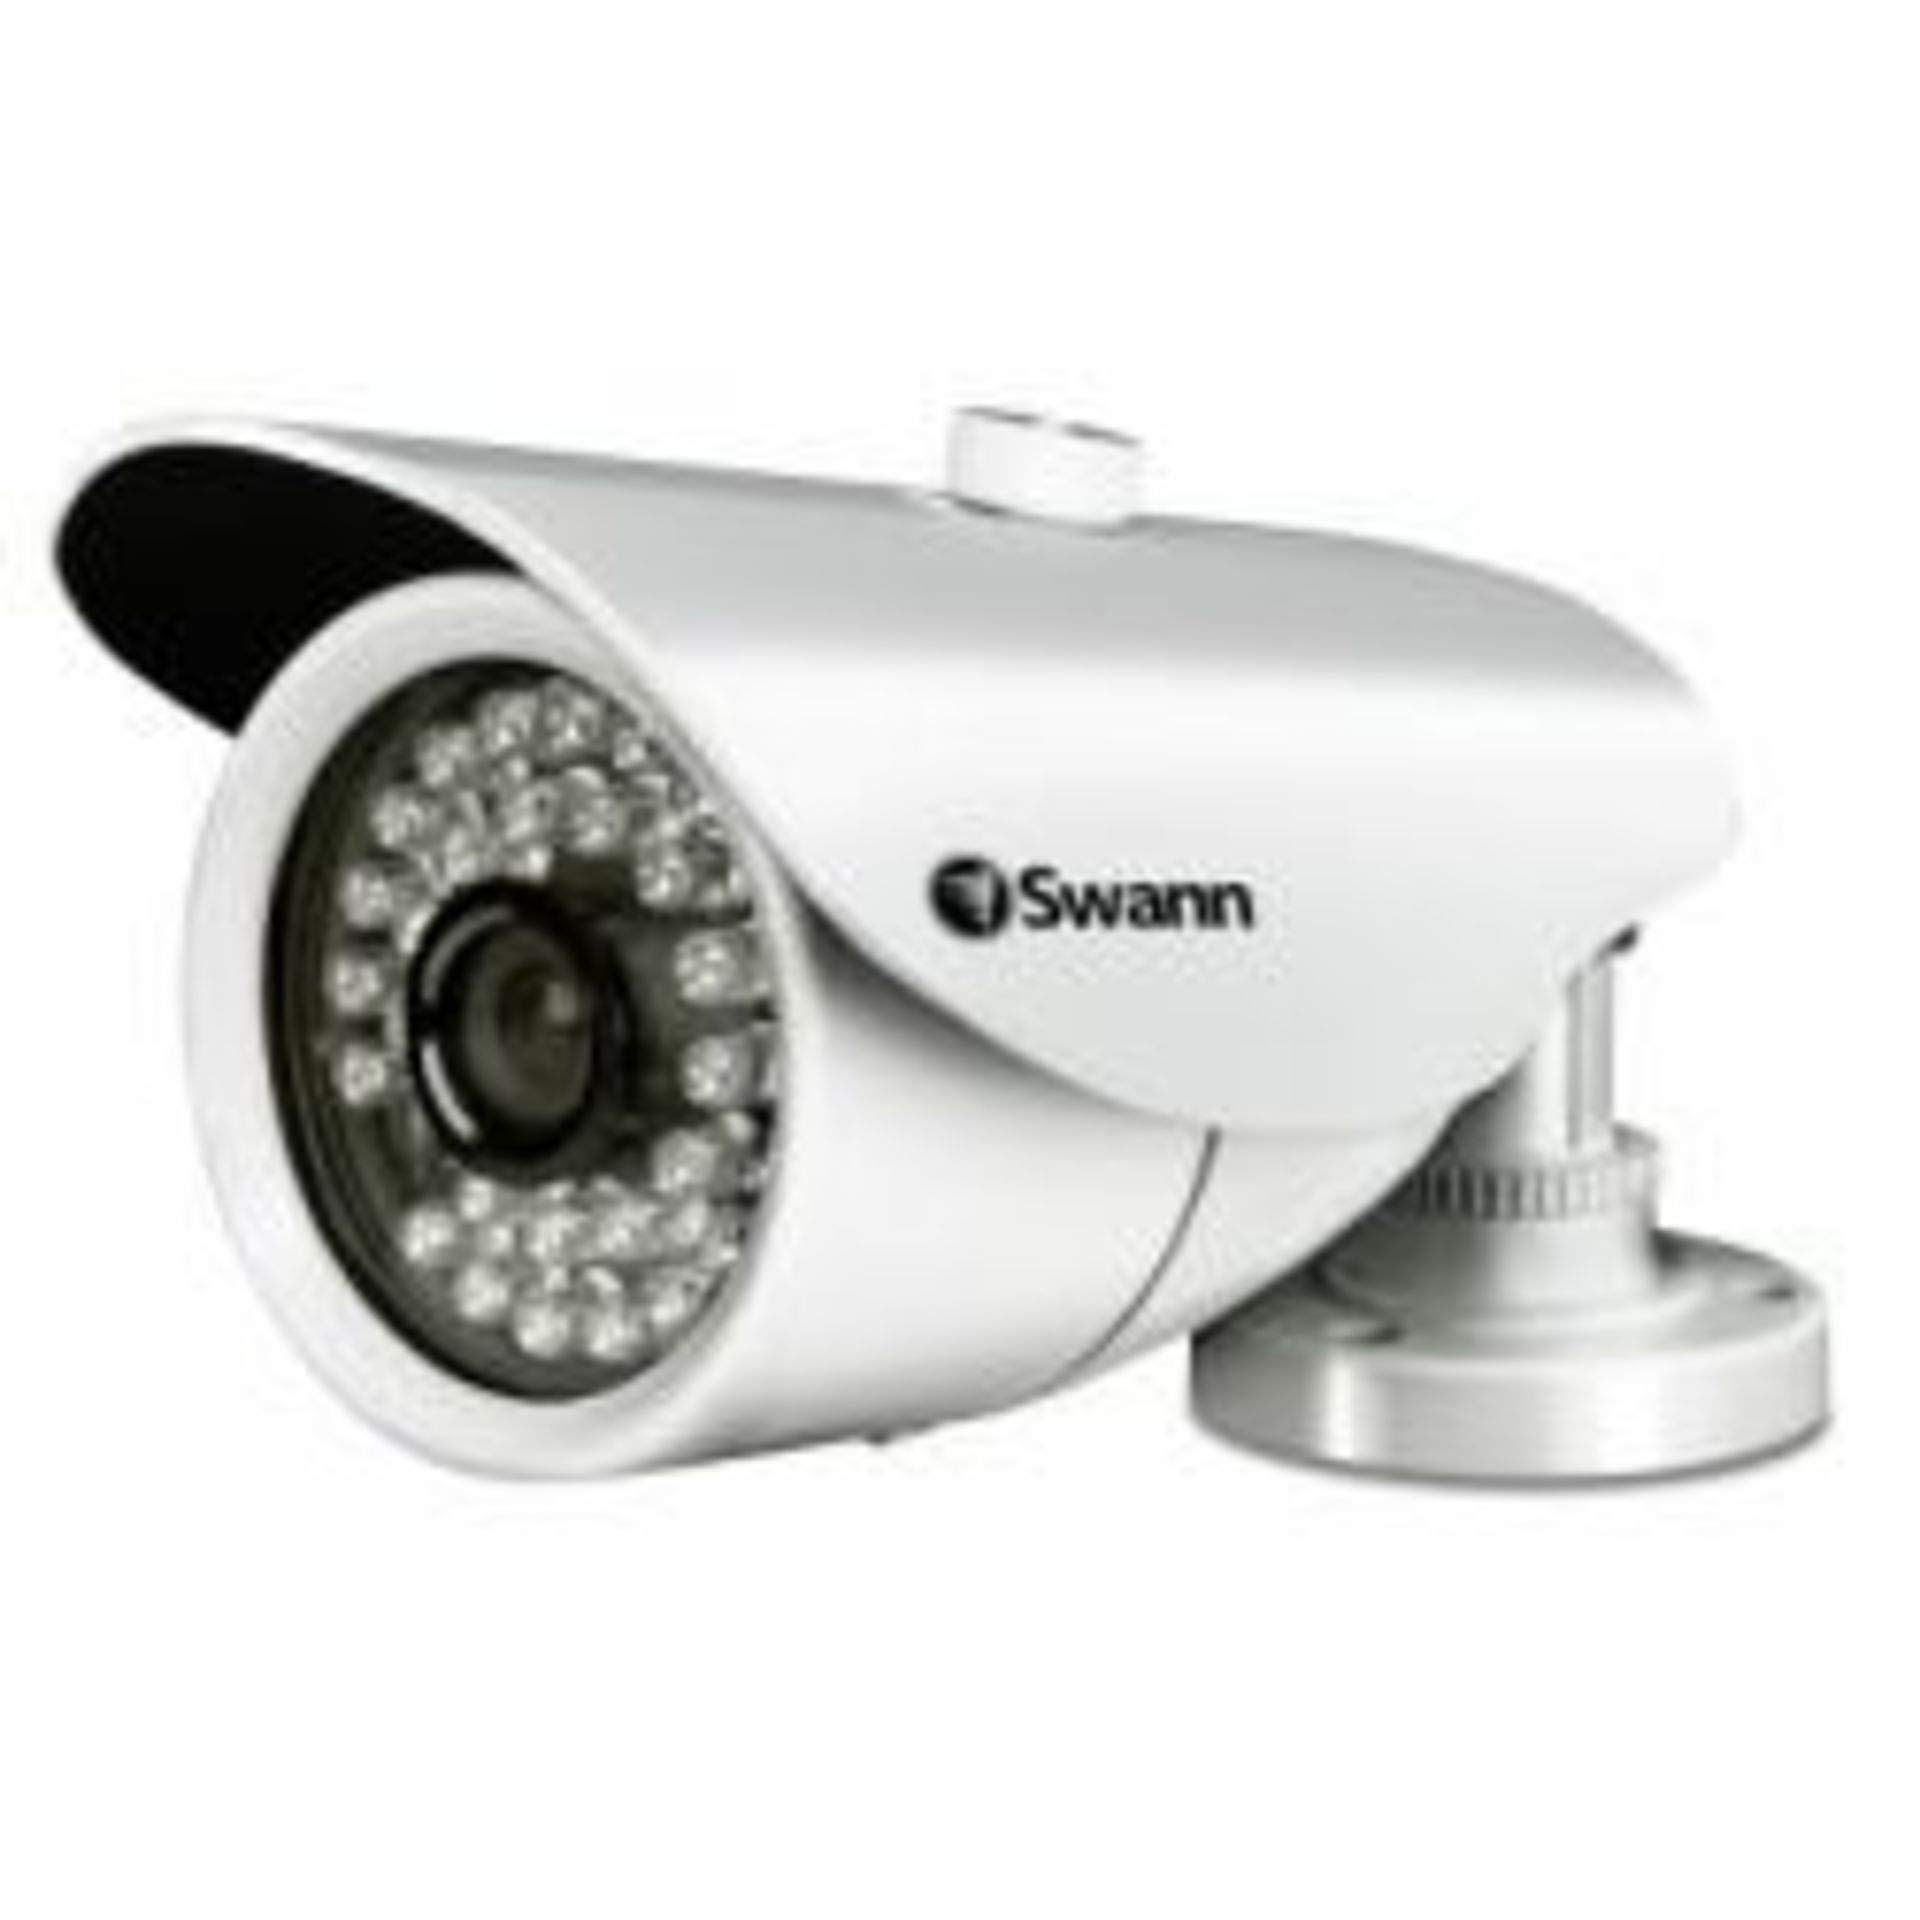 V *TRADE QTY* Brand New Swann PRO-870 Bullet Cam 850 TVL - Powerful Night Vision Up To 35m/114ft X 4